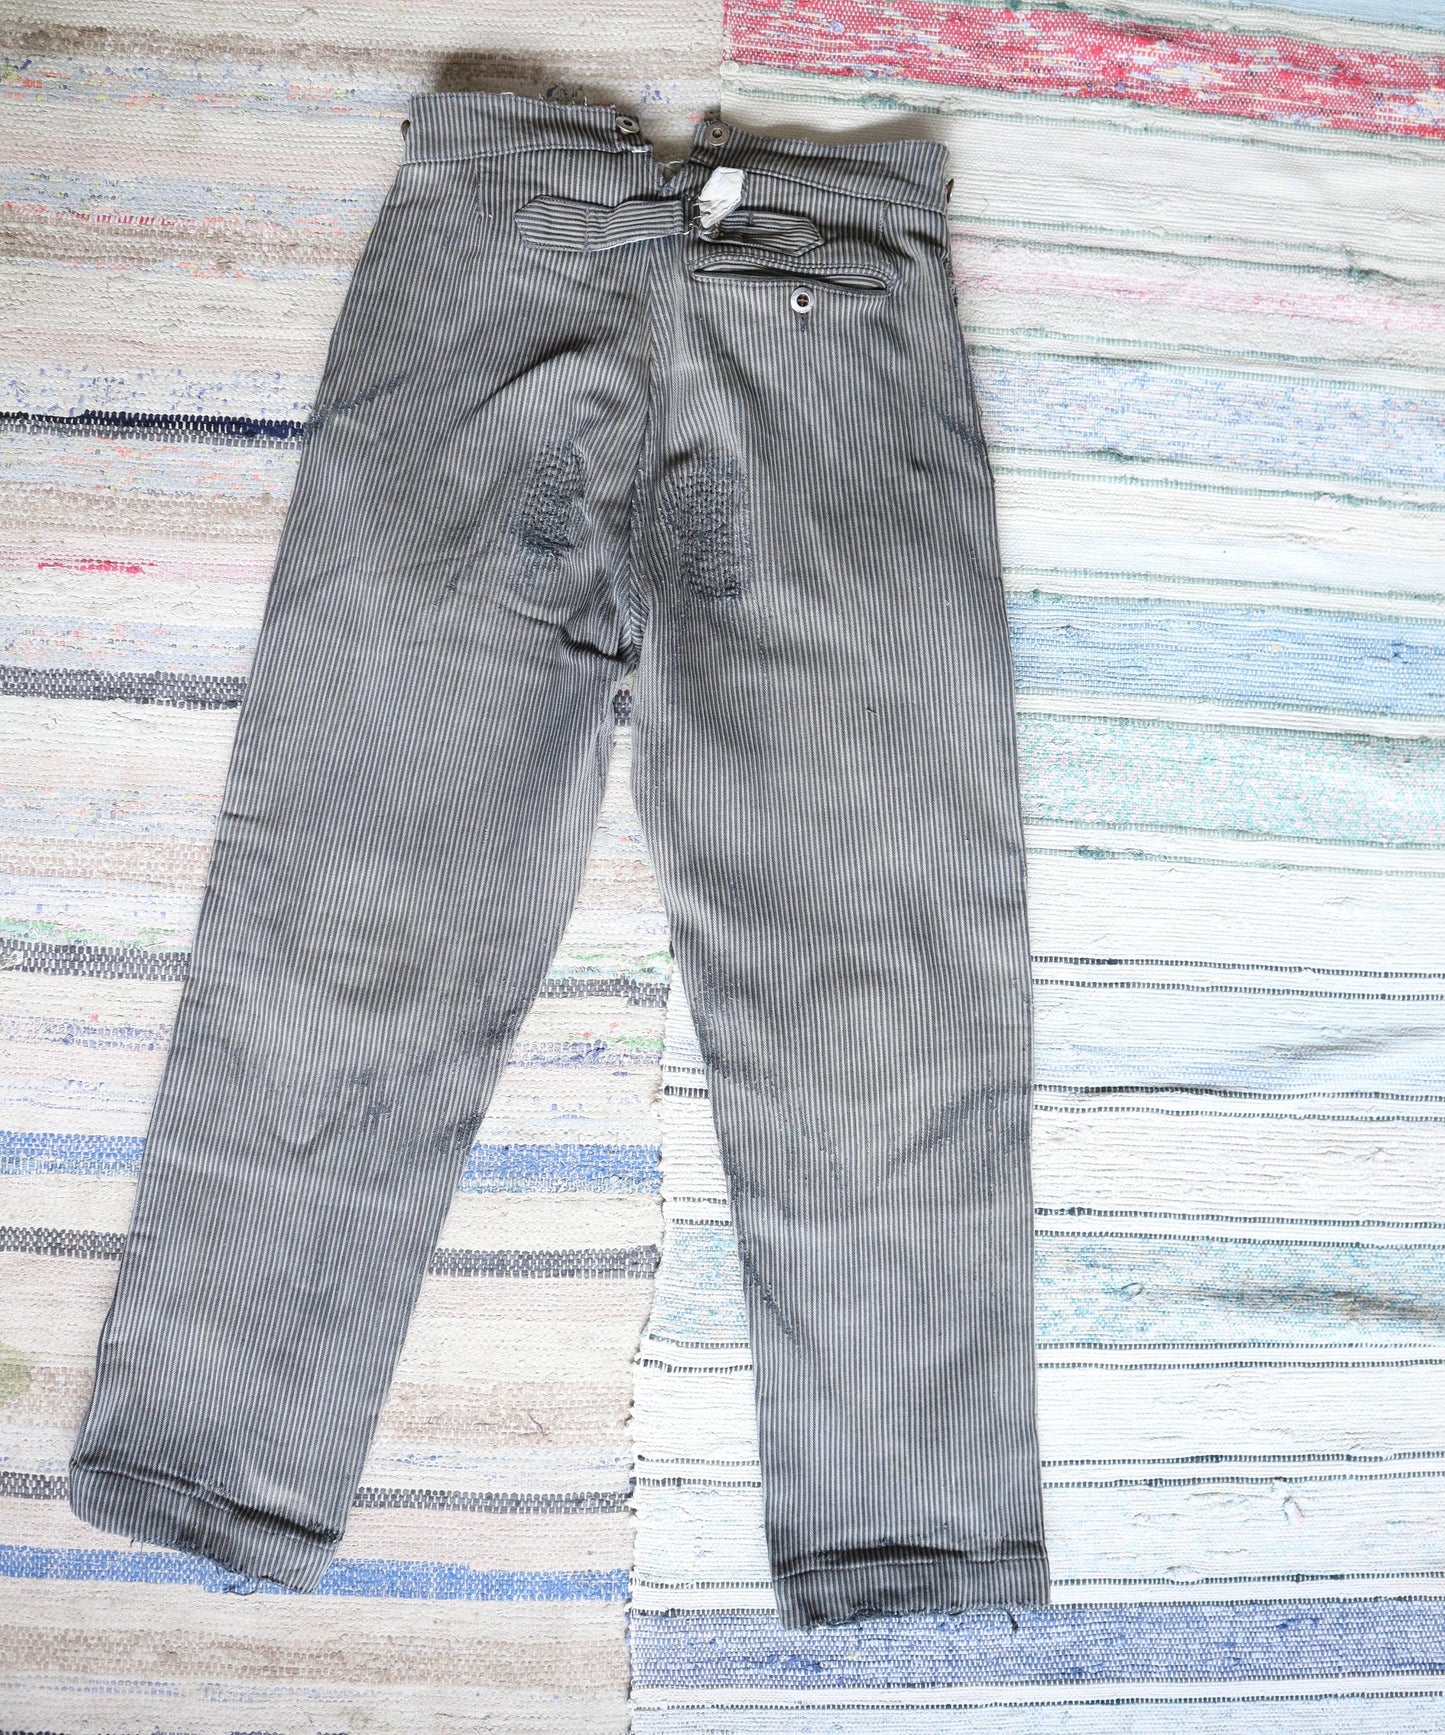 French 1940s Workwear Trousers Grey Stripe Coutil Cotton Repaired Patched Darned Chore